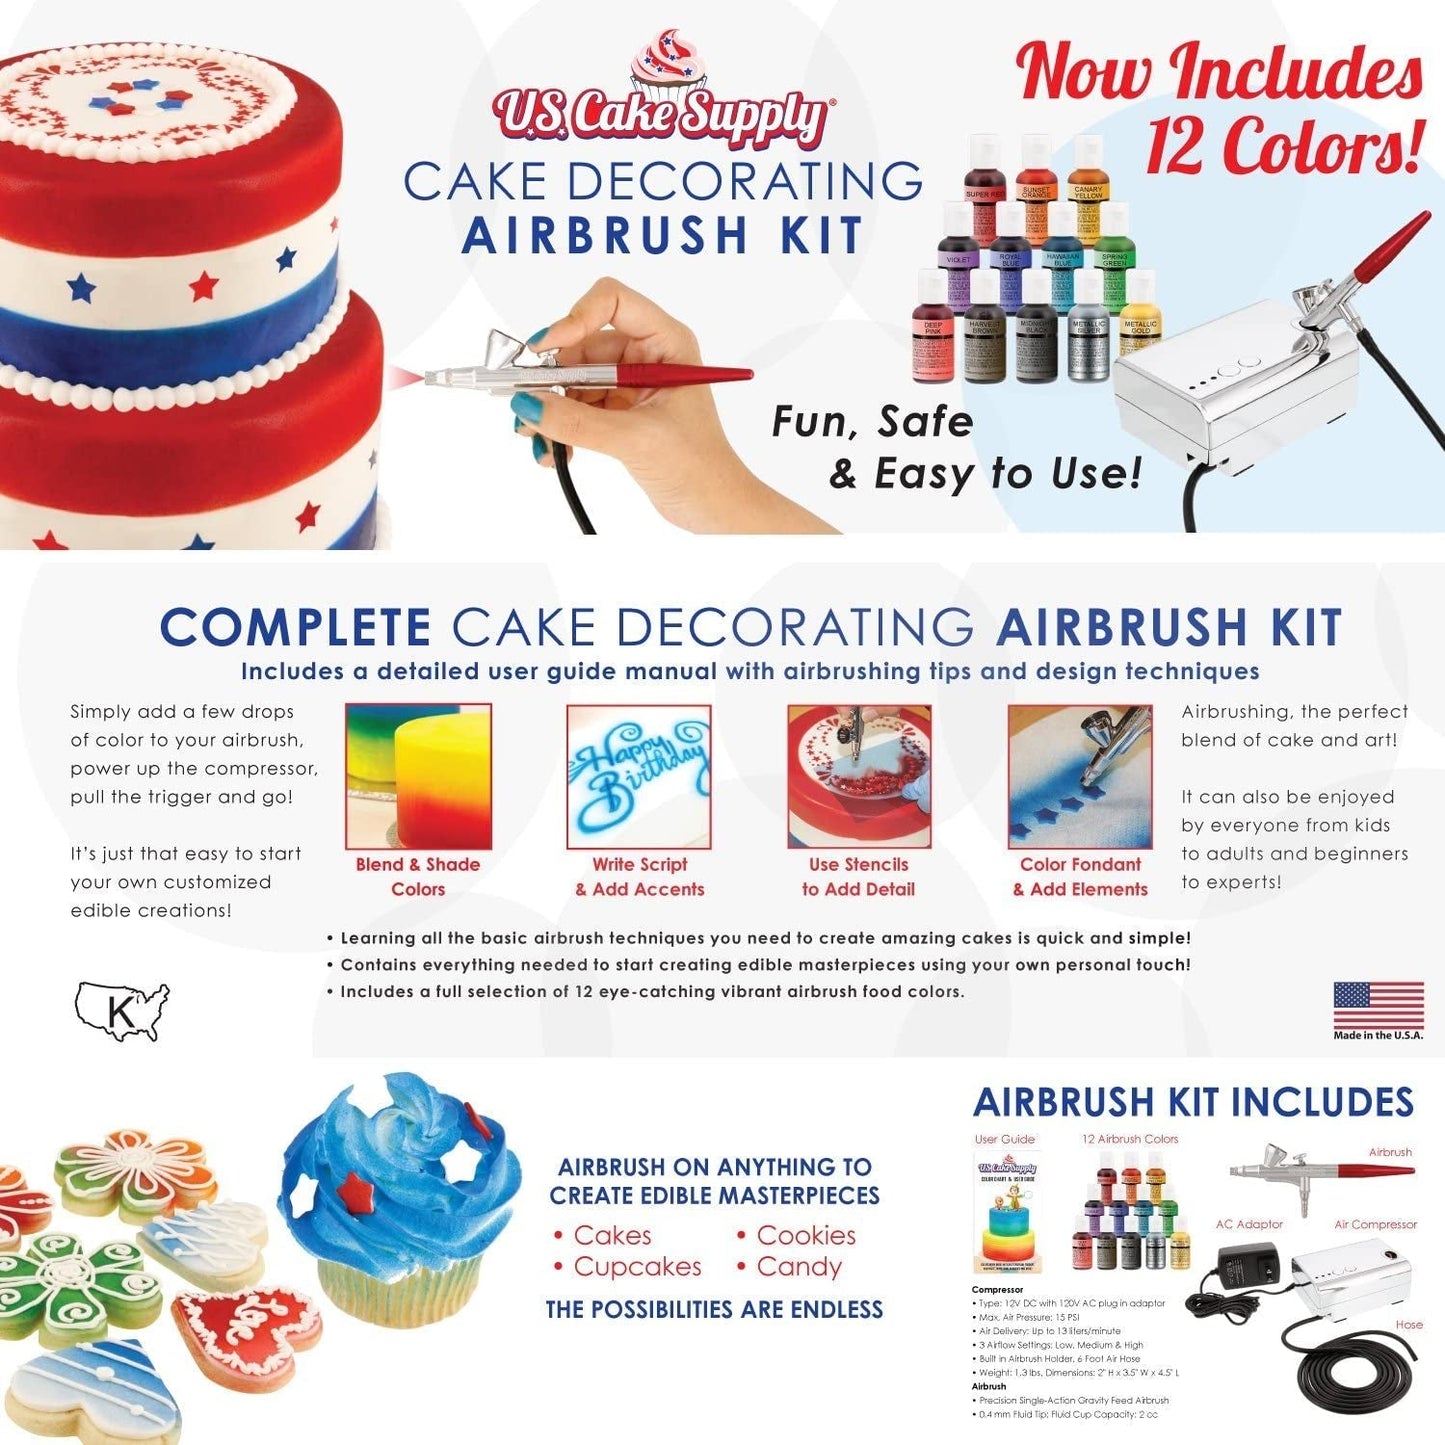 '- Complete Cake Decorating Airbrush Kit with a Full Selection of 12 Vivid Airbrush Food Colors - Decorate Cakes, Cupcakes, Cookies & Desserts